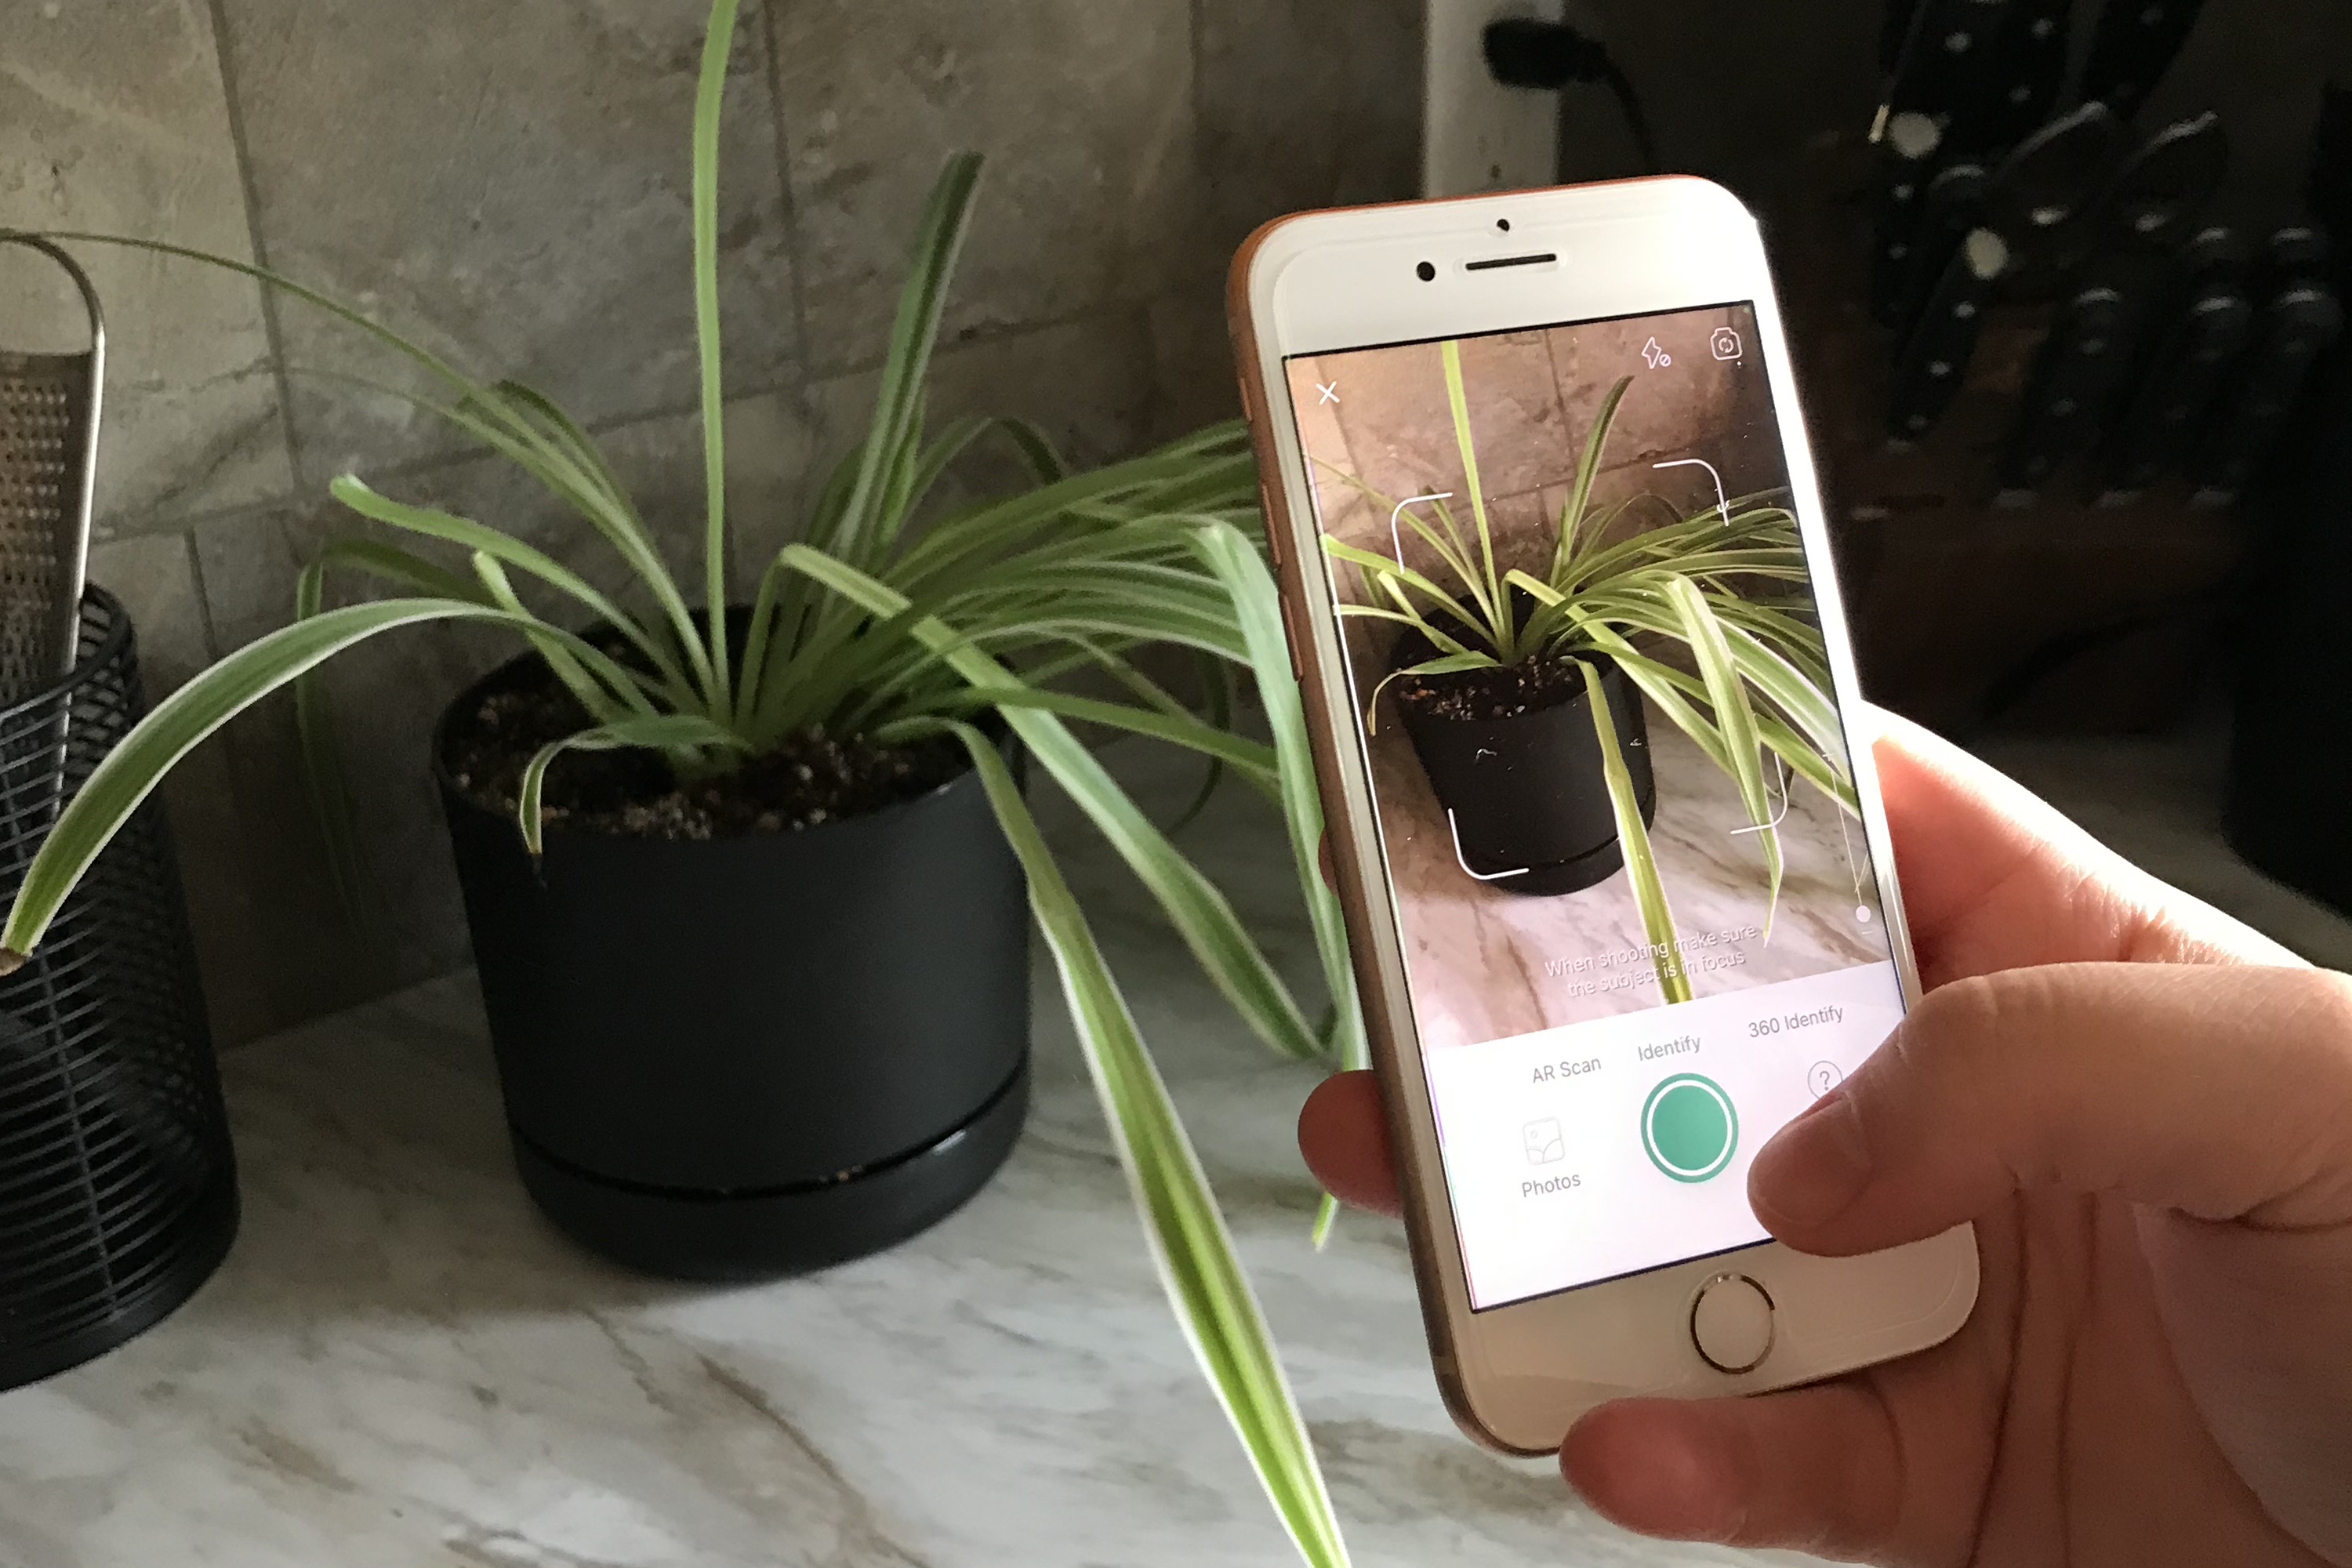  I tried 3 plant identification apps, and one was deadly